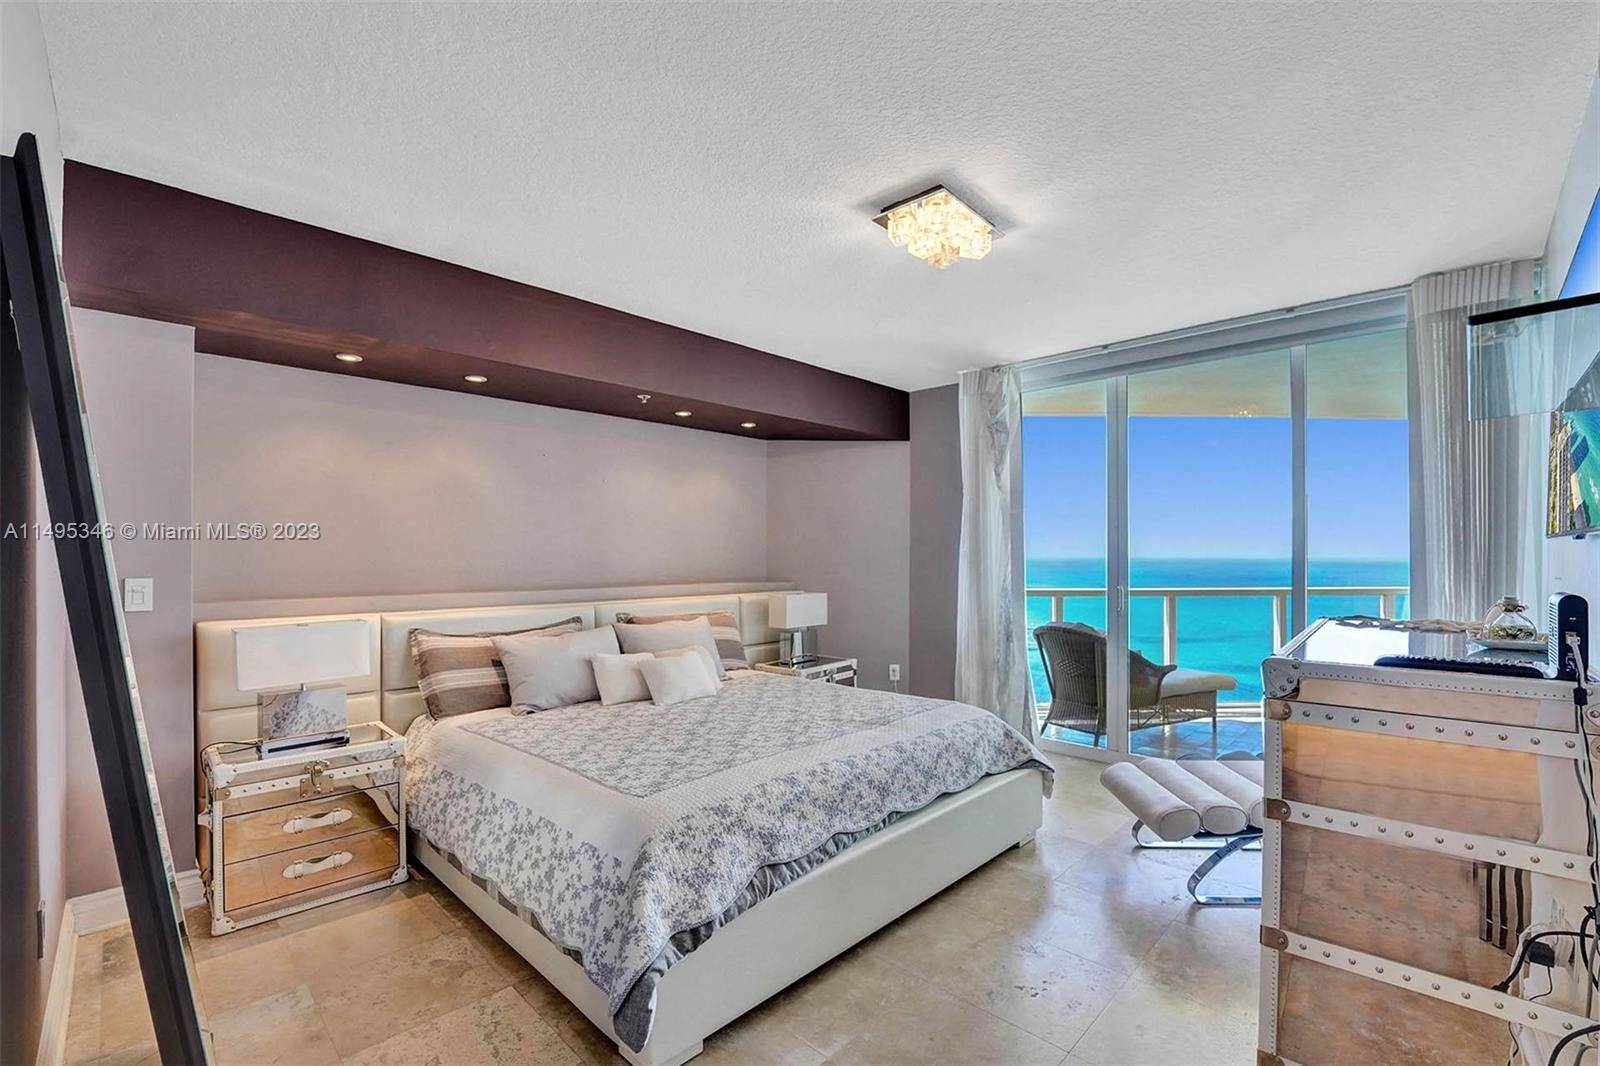 LUXURIOUS DIRECT OCEAN VIEW CONDO, 2 FULL BEDROOMS PLUS DEN WHICH IS CONVERTED TO A GUEST ROOM WITH QUEEN BED AND 2.